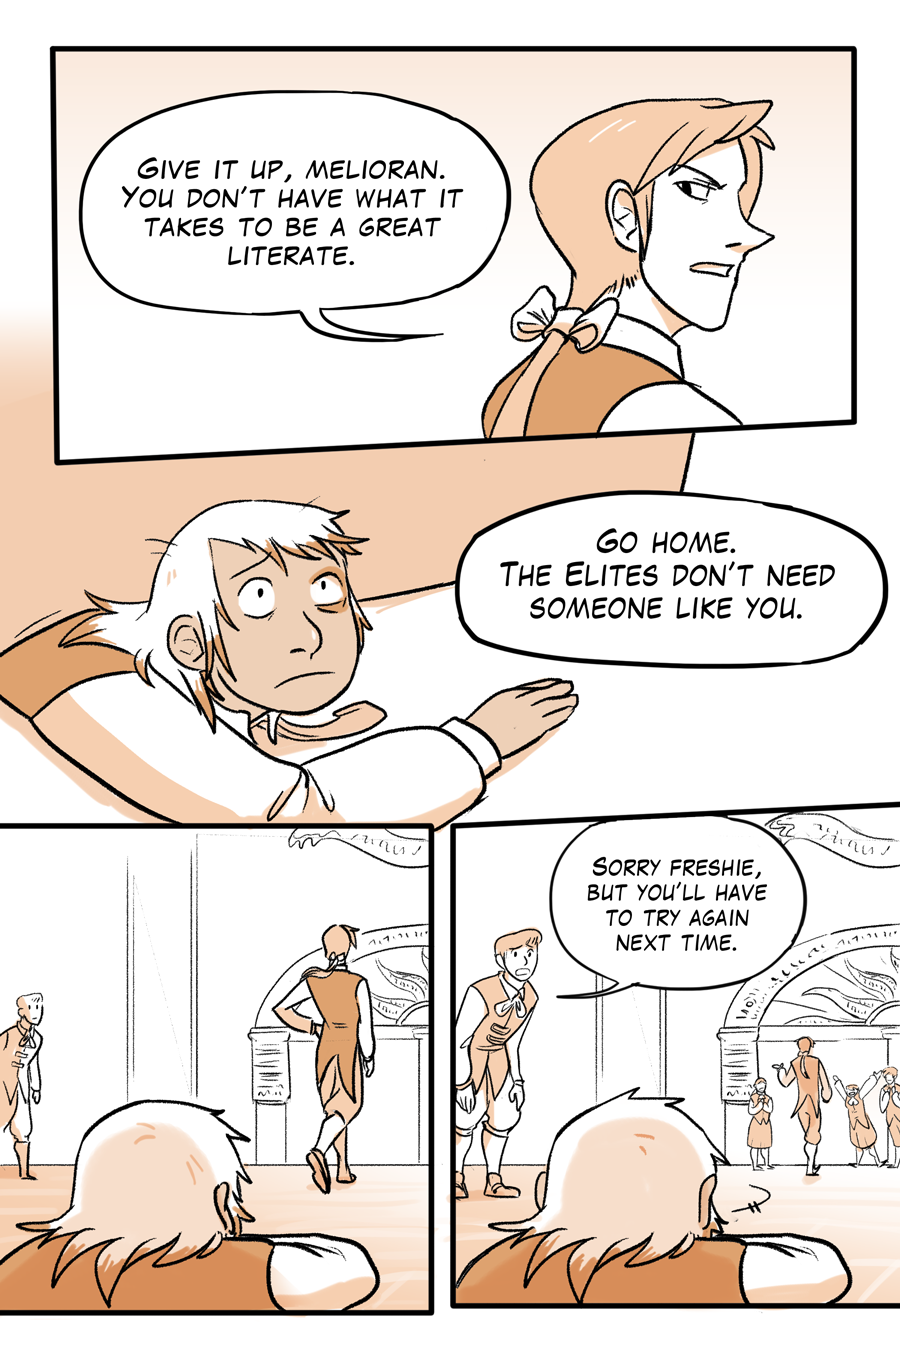 The Literate (pg 14) YDHWIT